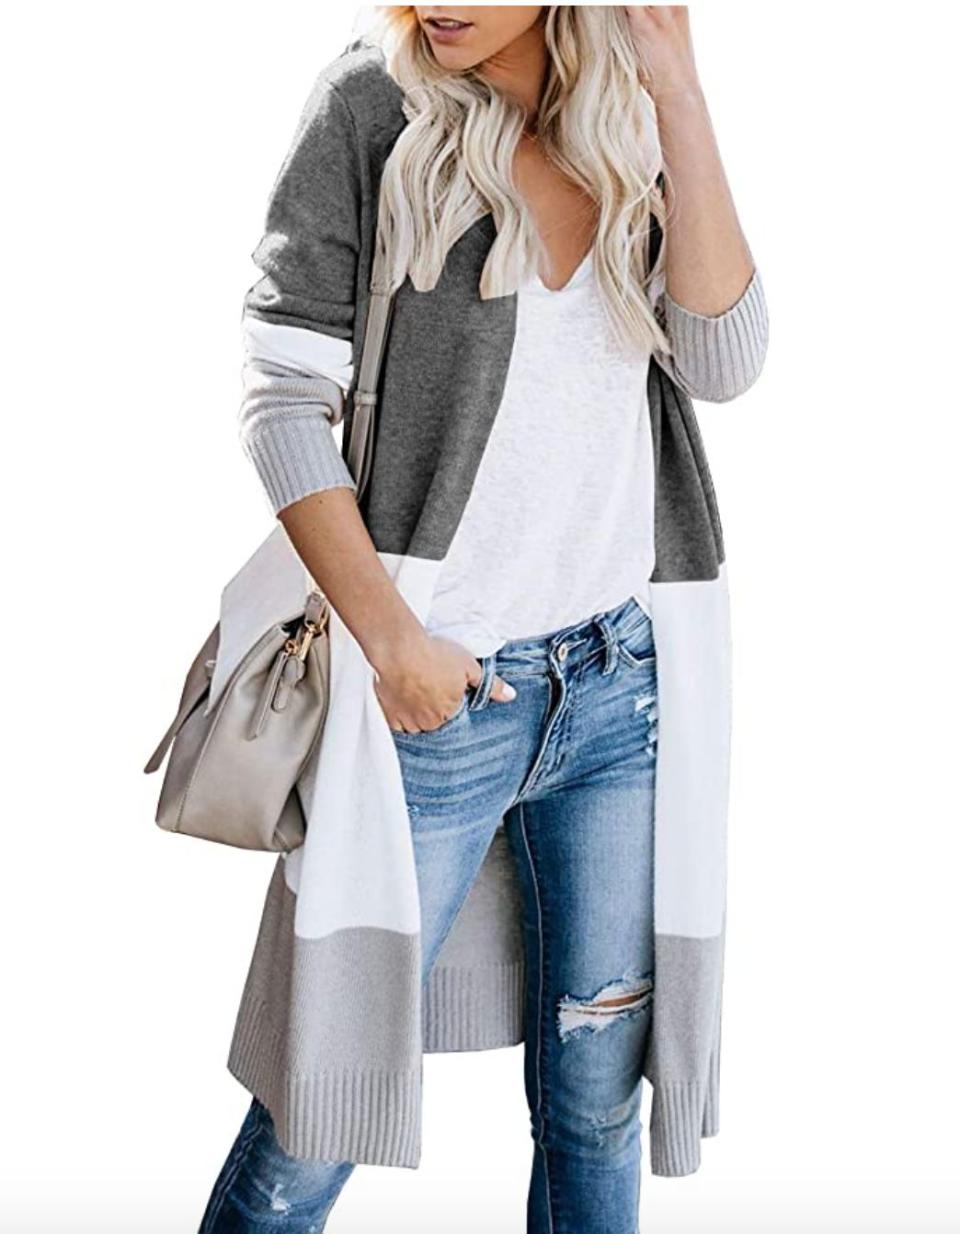 <a href="https://amzn.to/2RRKqrI" target="_blank" rel="noopener noreferrer">This long colorblock cardigan</a> is available in sizes XS to XL in 14 colors. Find it for $32 on <a href="https://amzn.to/2RRKqrI" target="_blank" rel="noopener noreferrer">Amazon</a>.